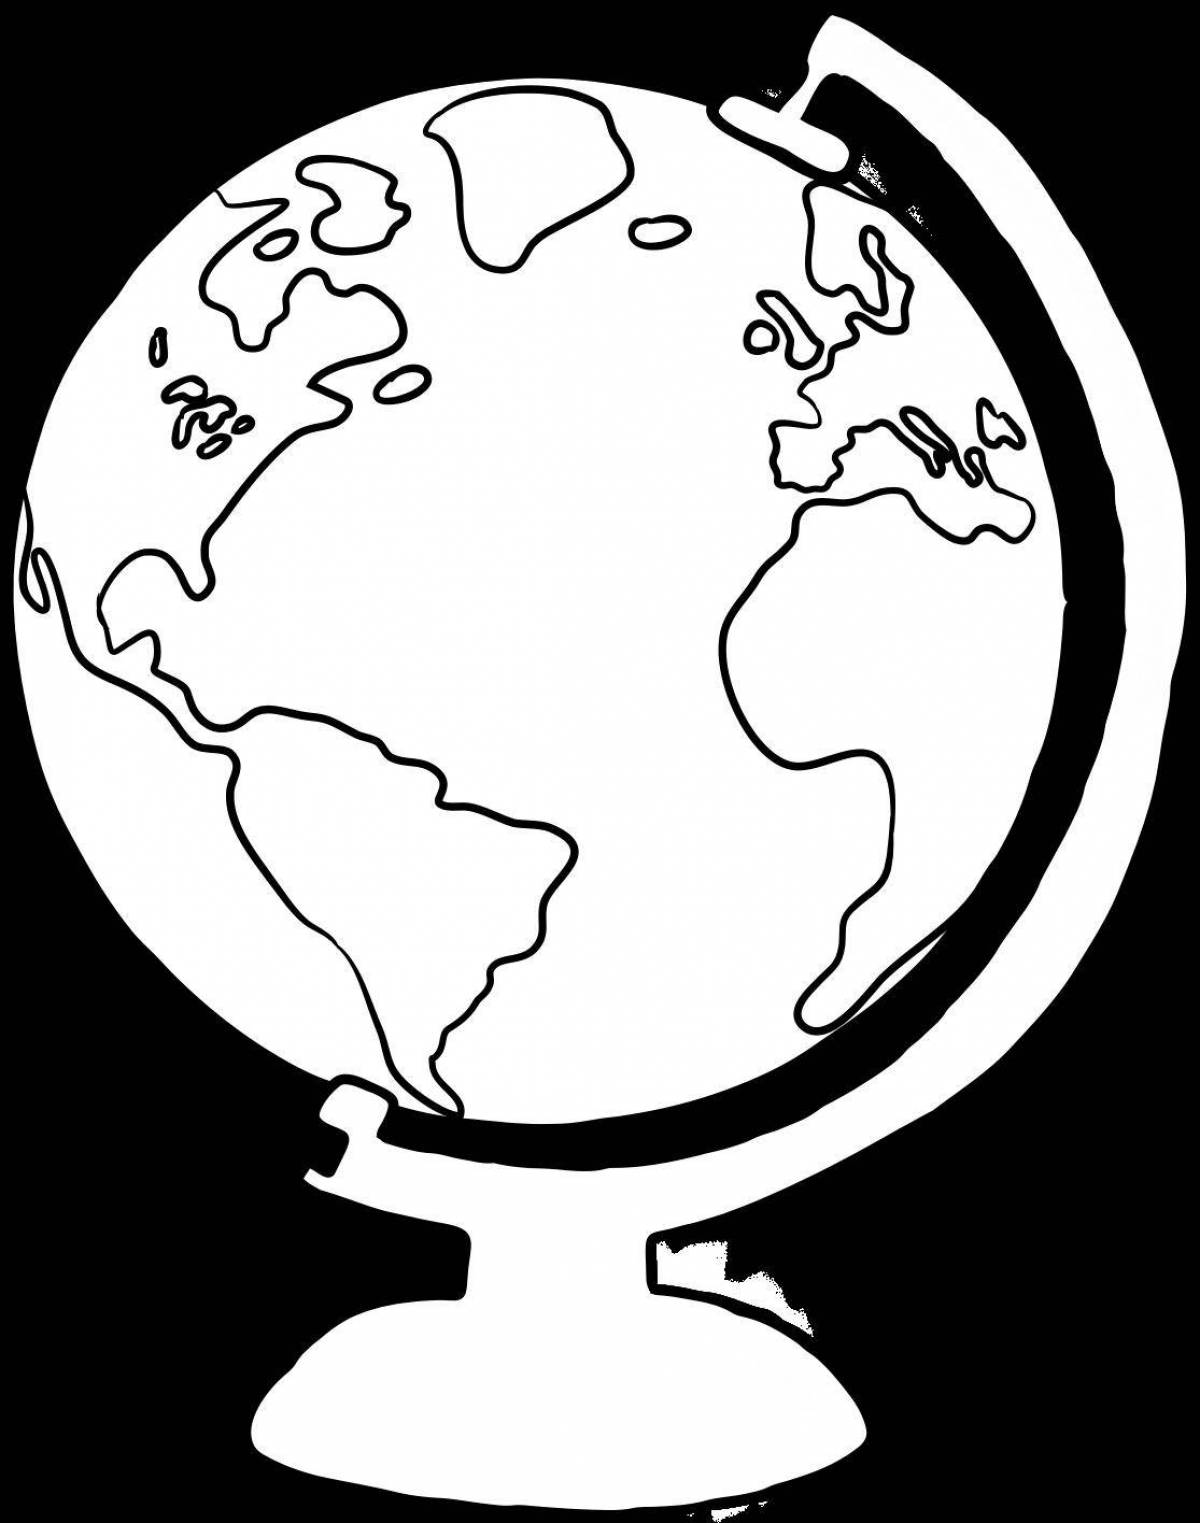 Adorable globe coloring page